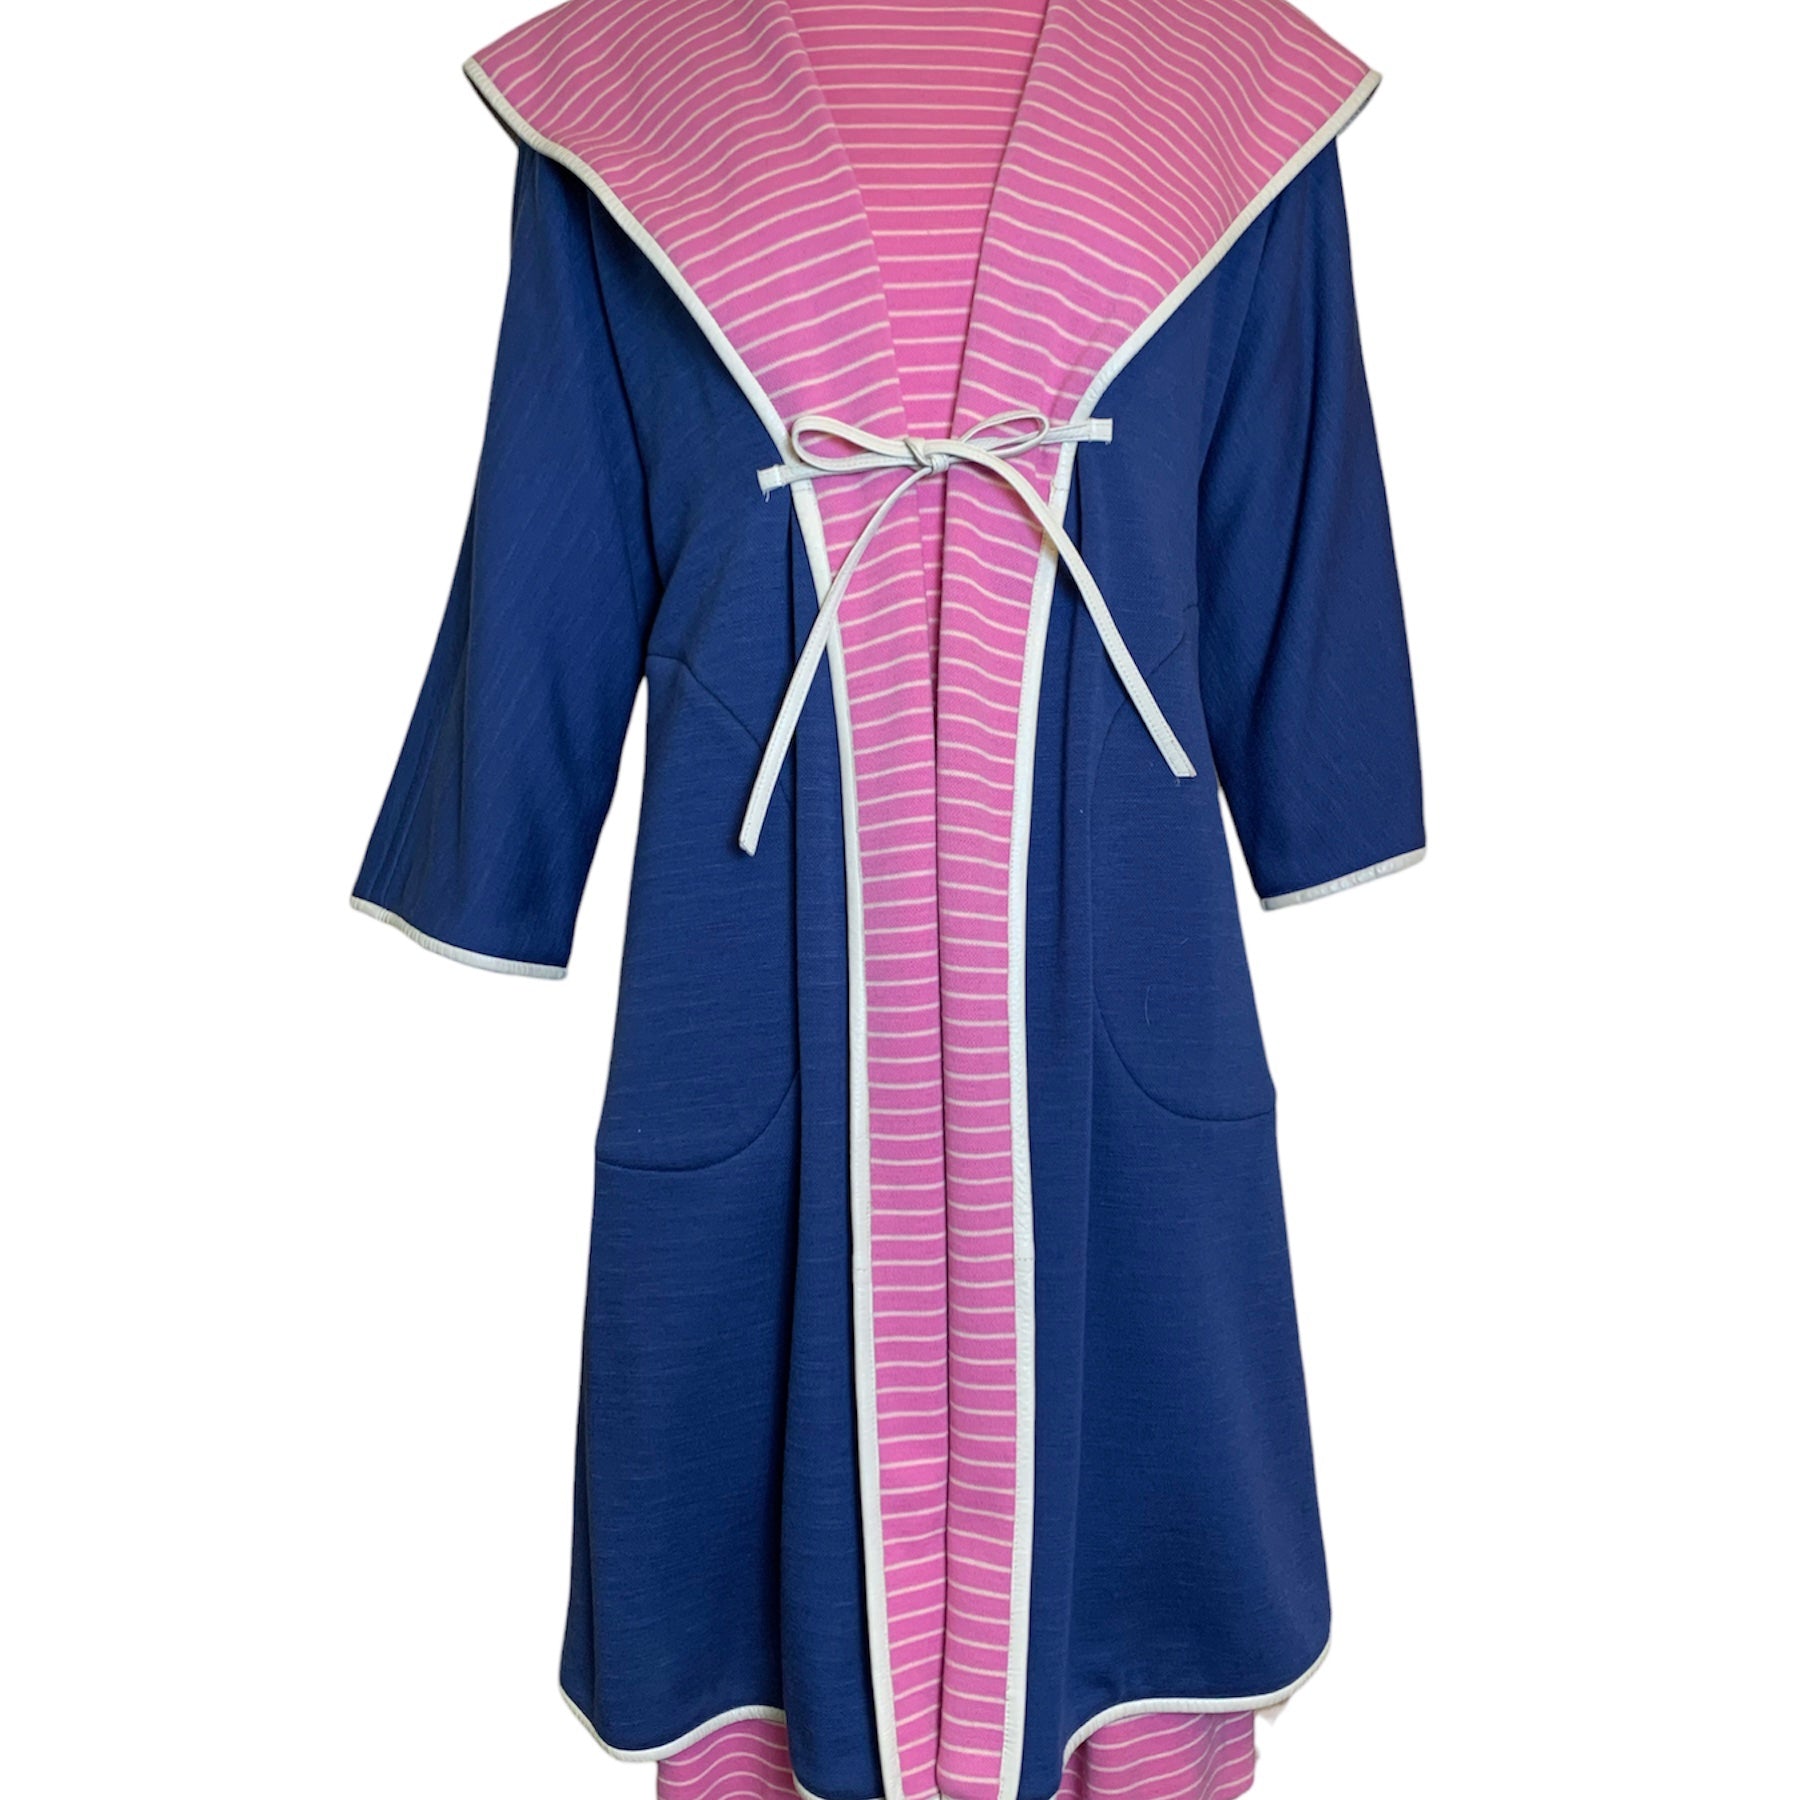 SILLS by Bonnie Cashin Blue and Pink Striped Swing Jacket and Dress Ensemble FRONT FRONT 1 of 7 